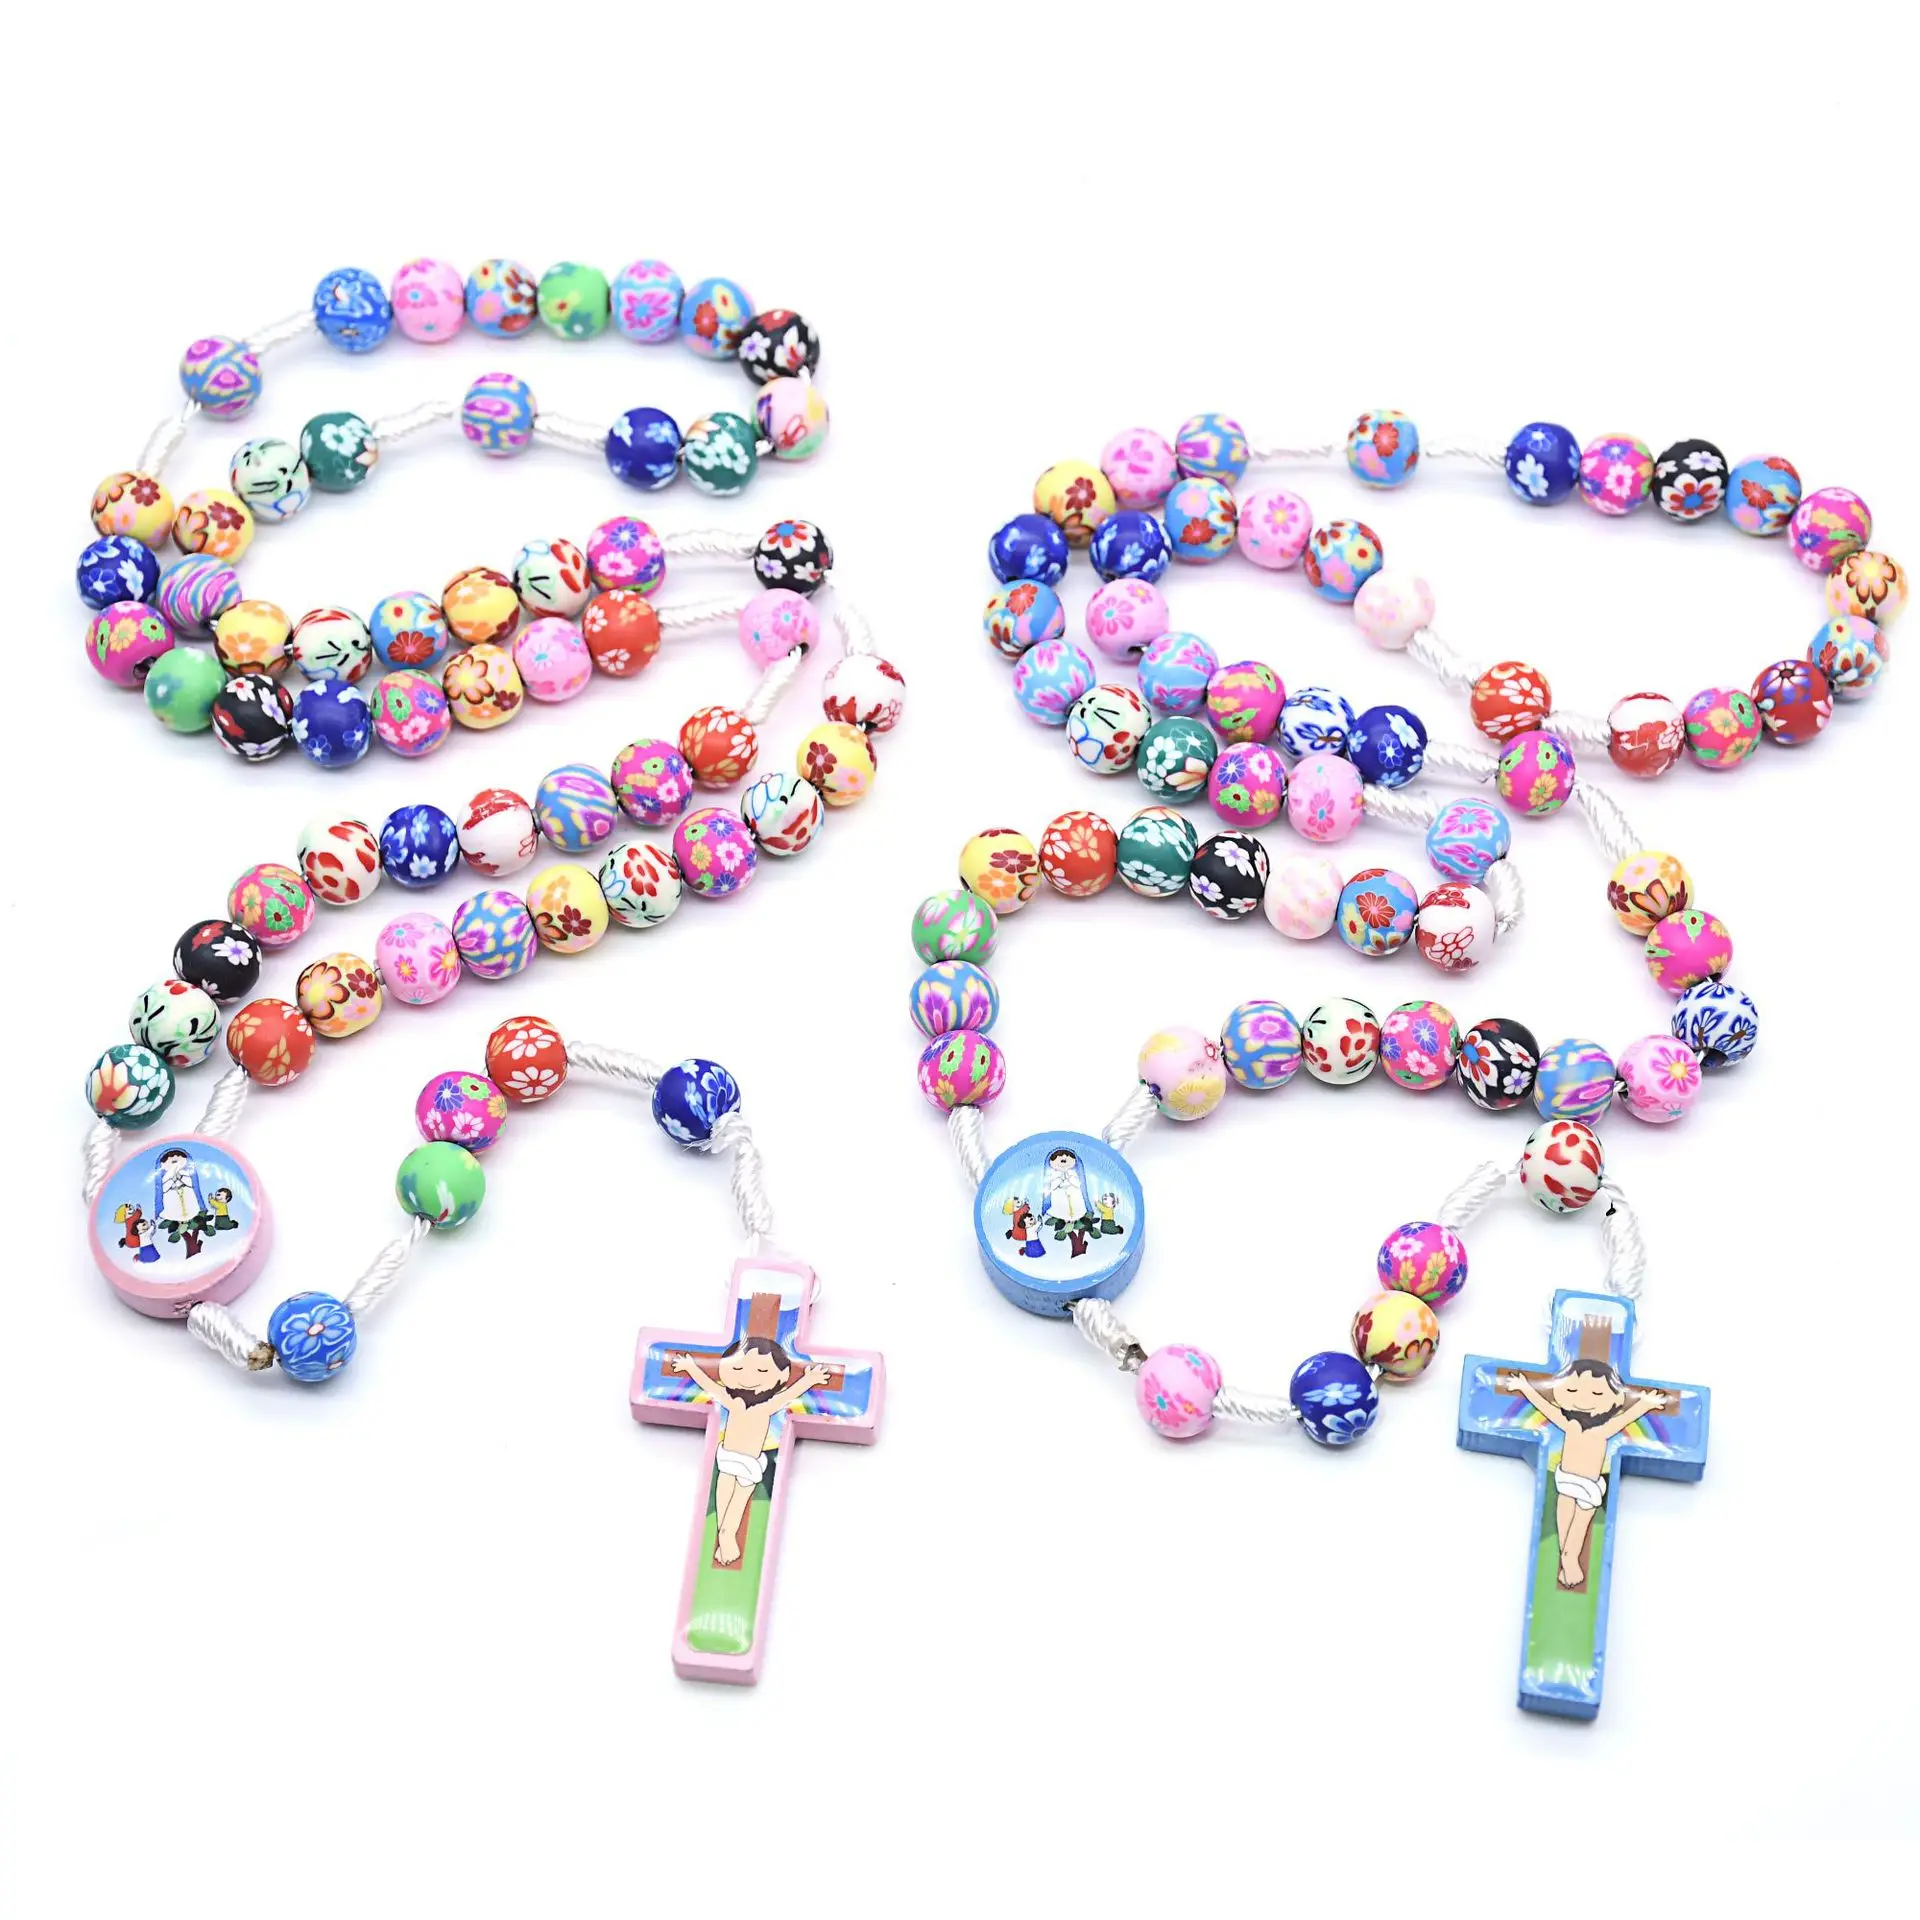 Colorful Cross Beaded Pendant Necklaces for Boy Girl Child Long Rosary Prayer Christian Religious Men Kids Jewelry